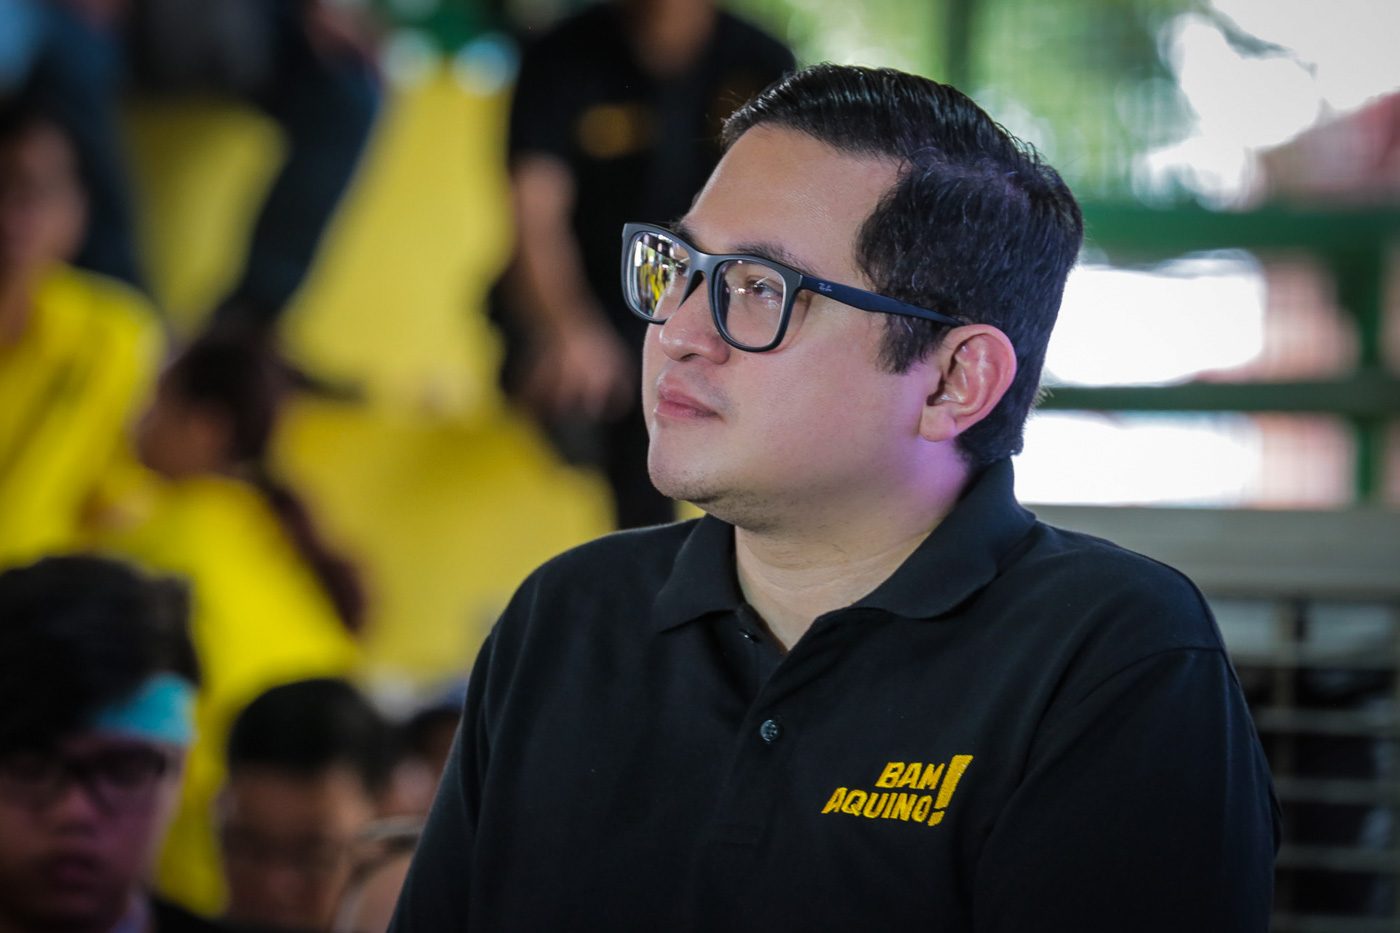 Bam Aquino amid canvassing of votes: Pray for me, pray for country